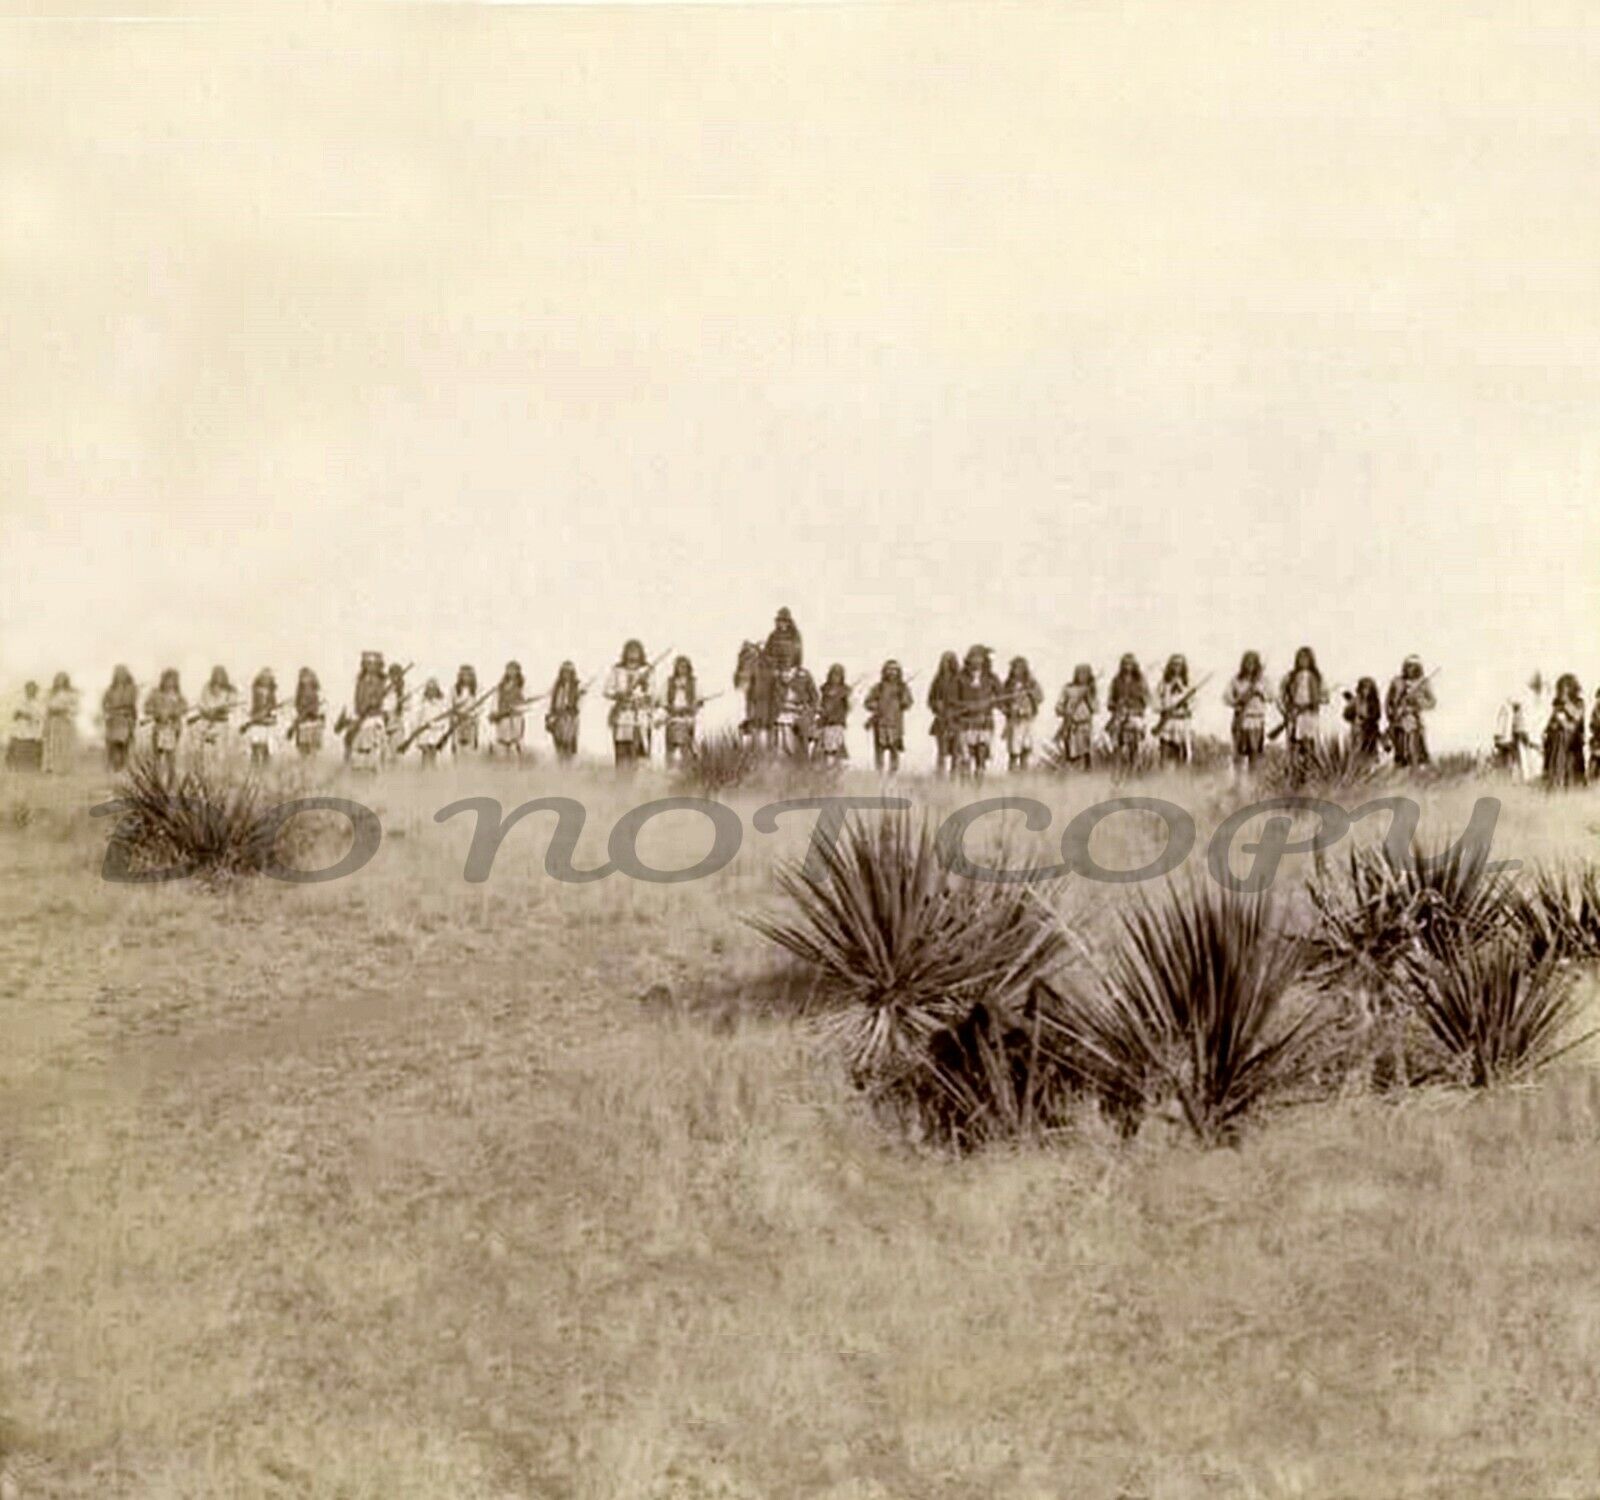 ANTIQUE REPRO PHOTOGRAPH PRINT OF APACHE TRIBE LEADER GERONIMO WITH HIS WARRIORS